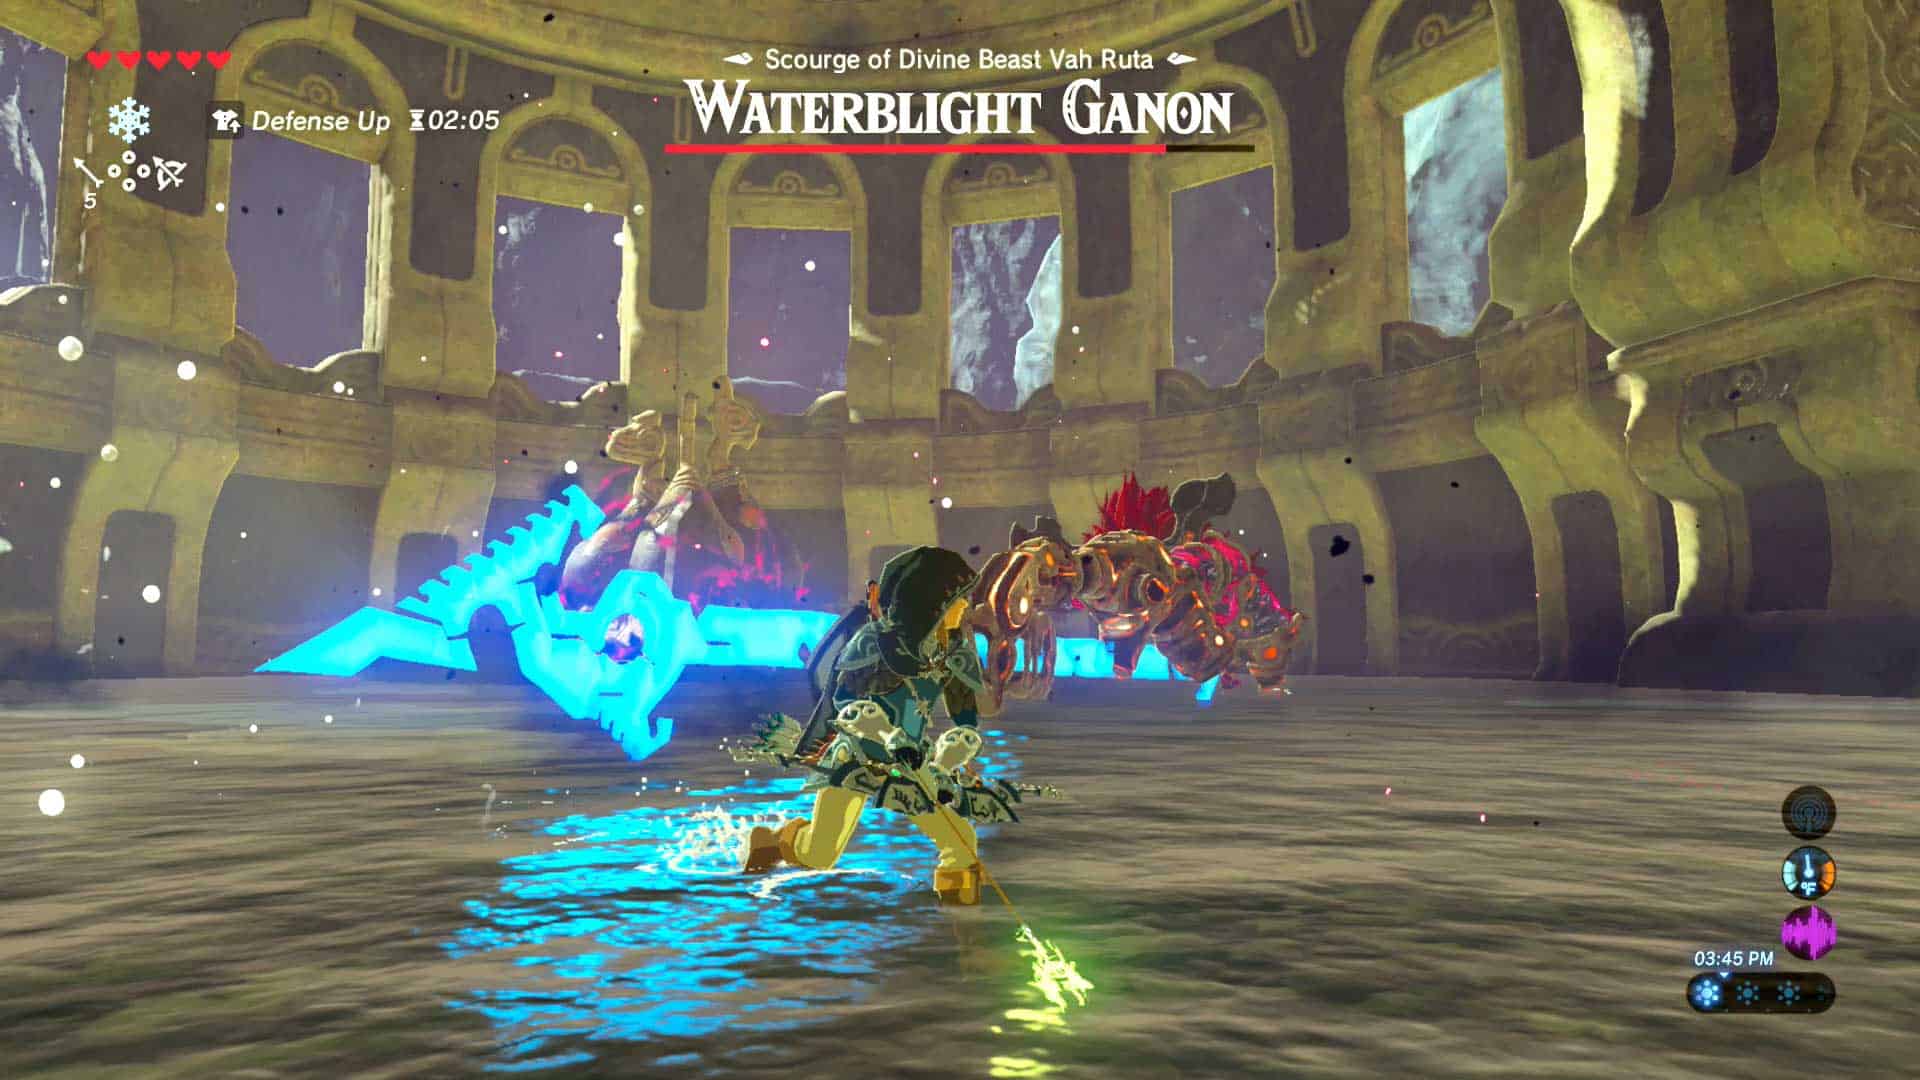 Defeating Waterblight Ganon in Stage One